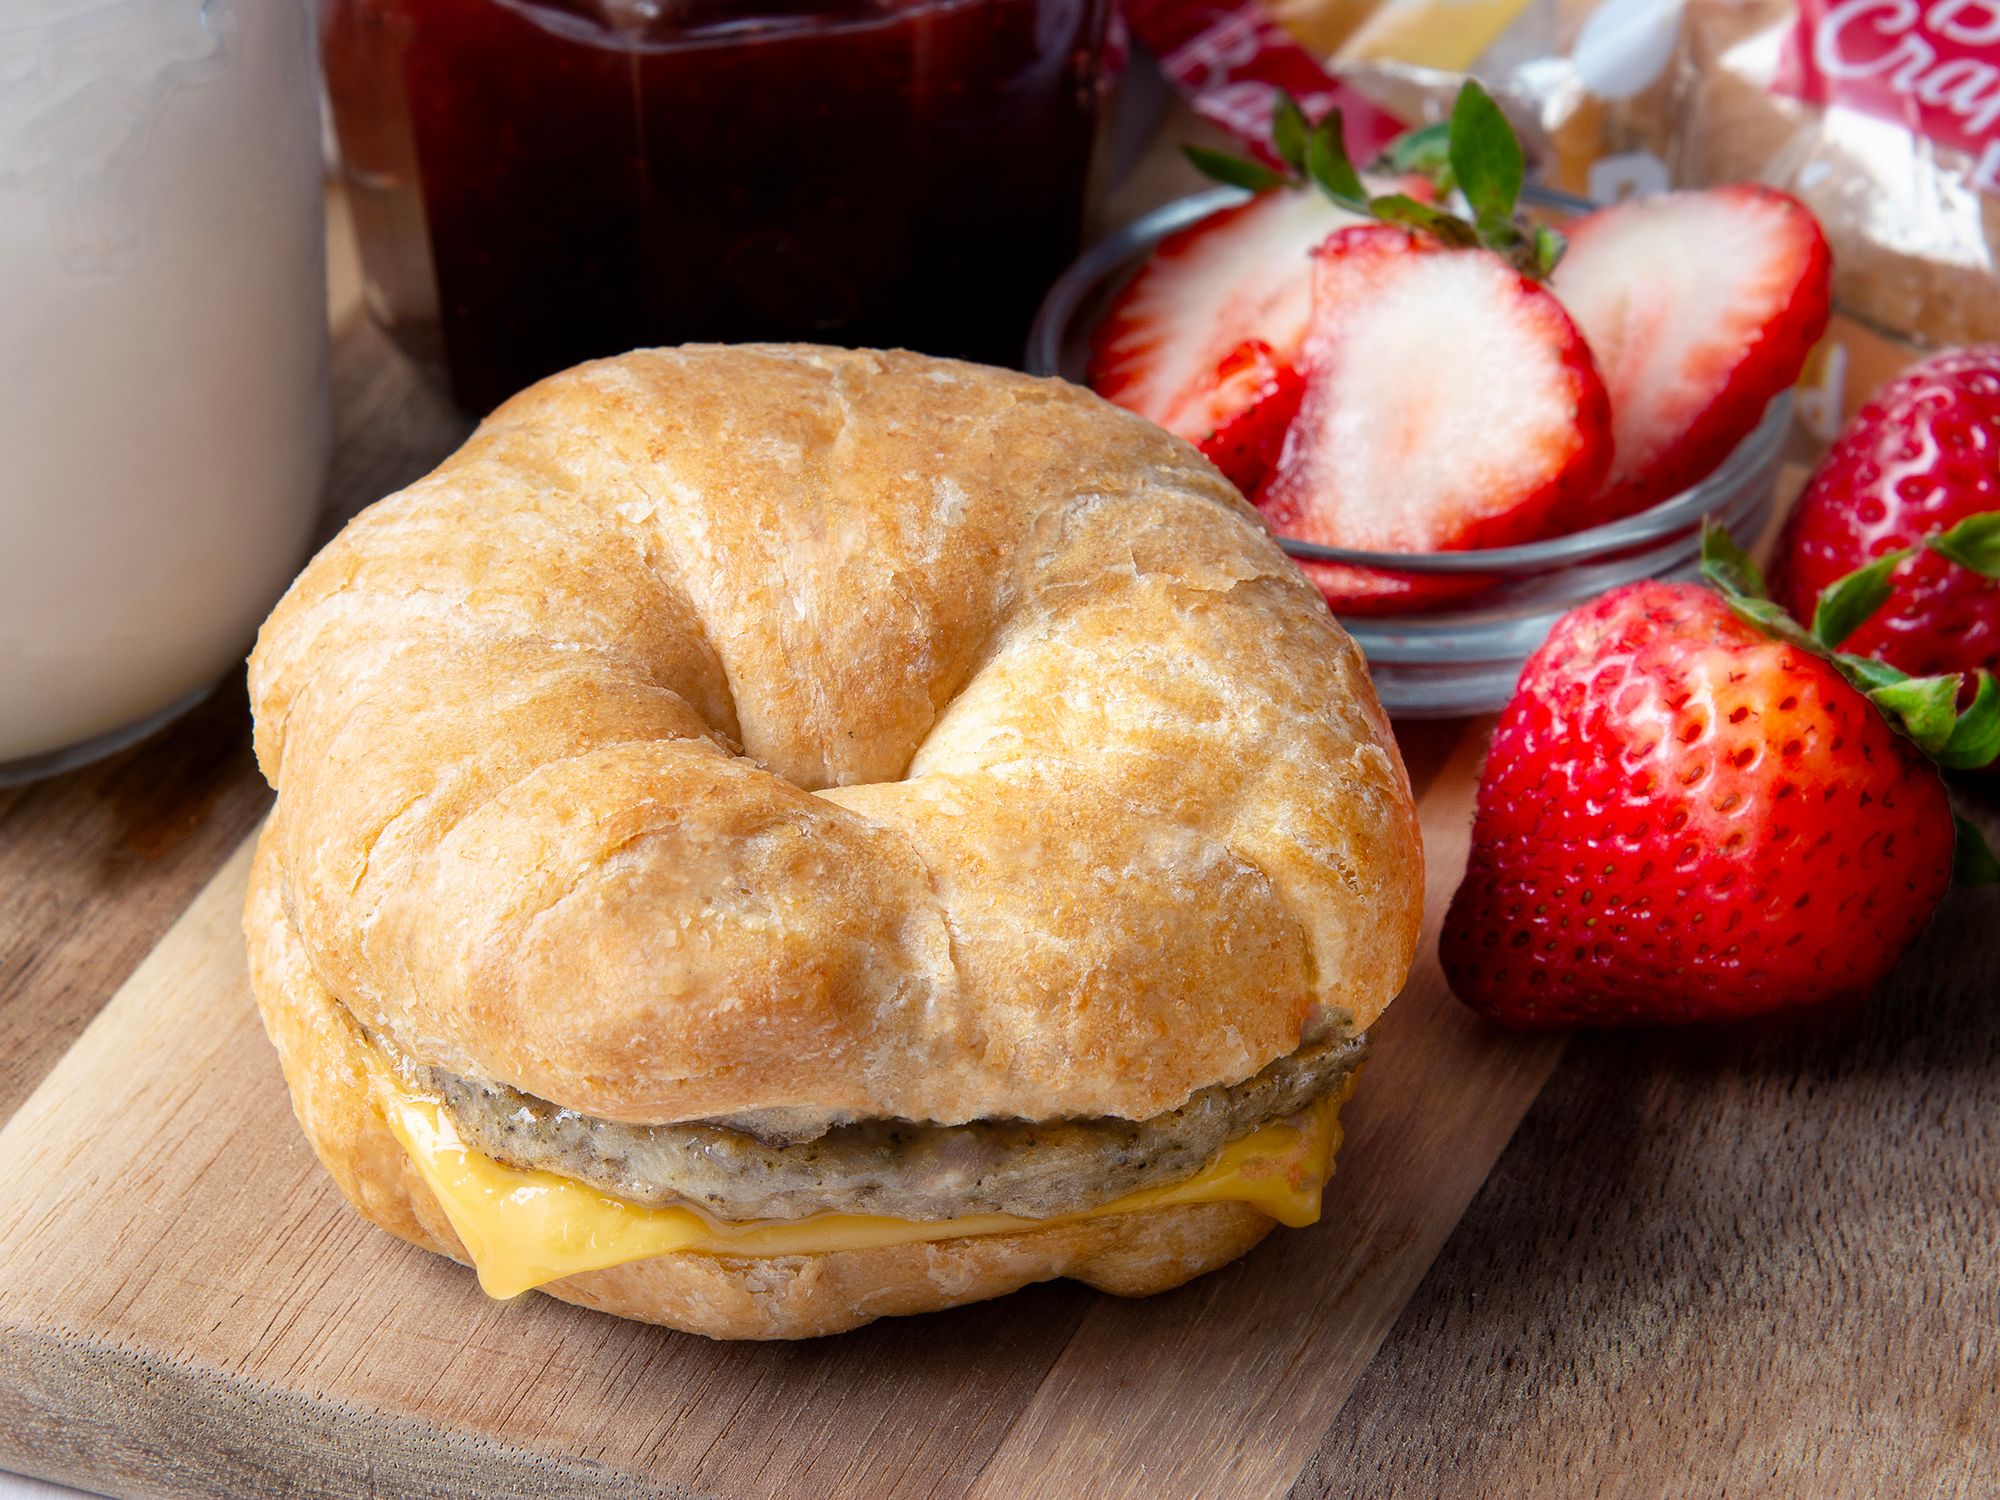 Introducing Croissant Breakfast Sandwiches!